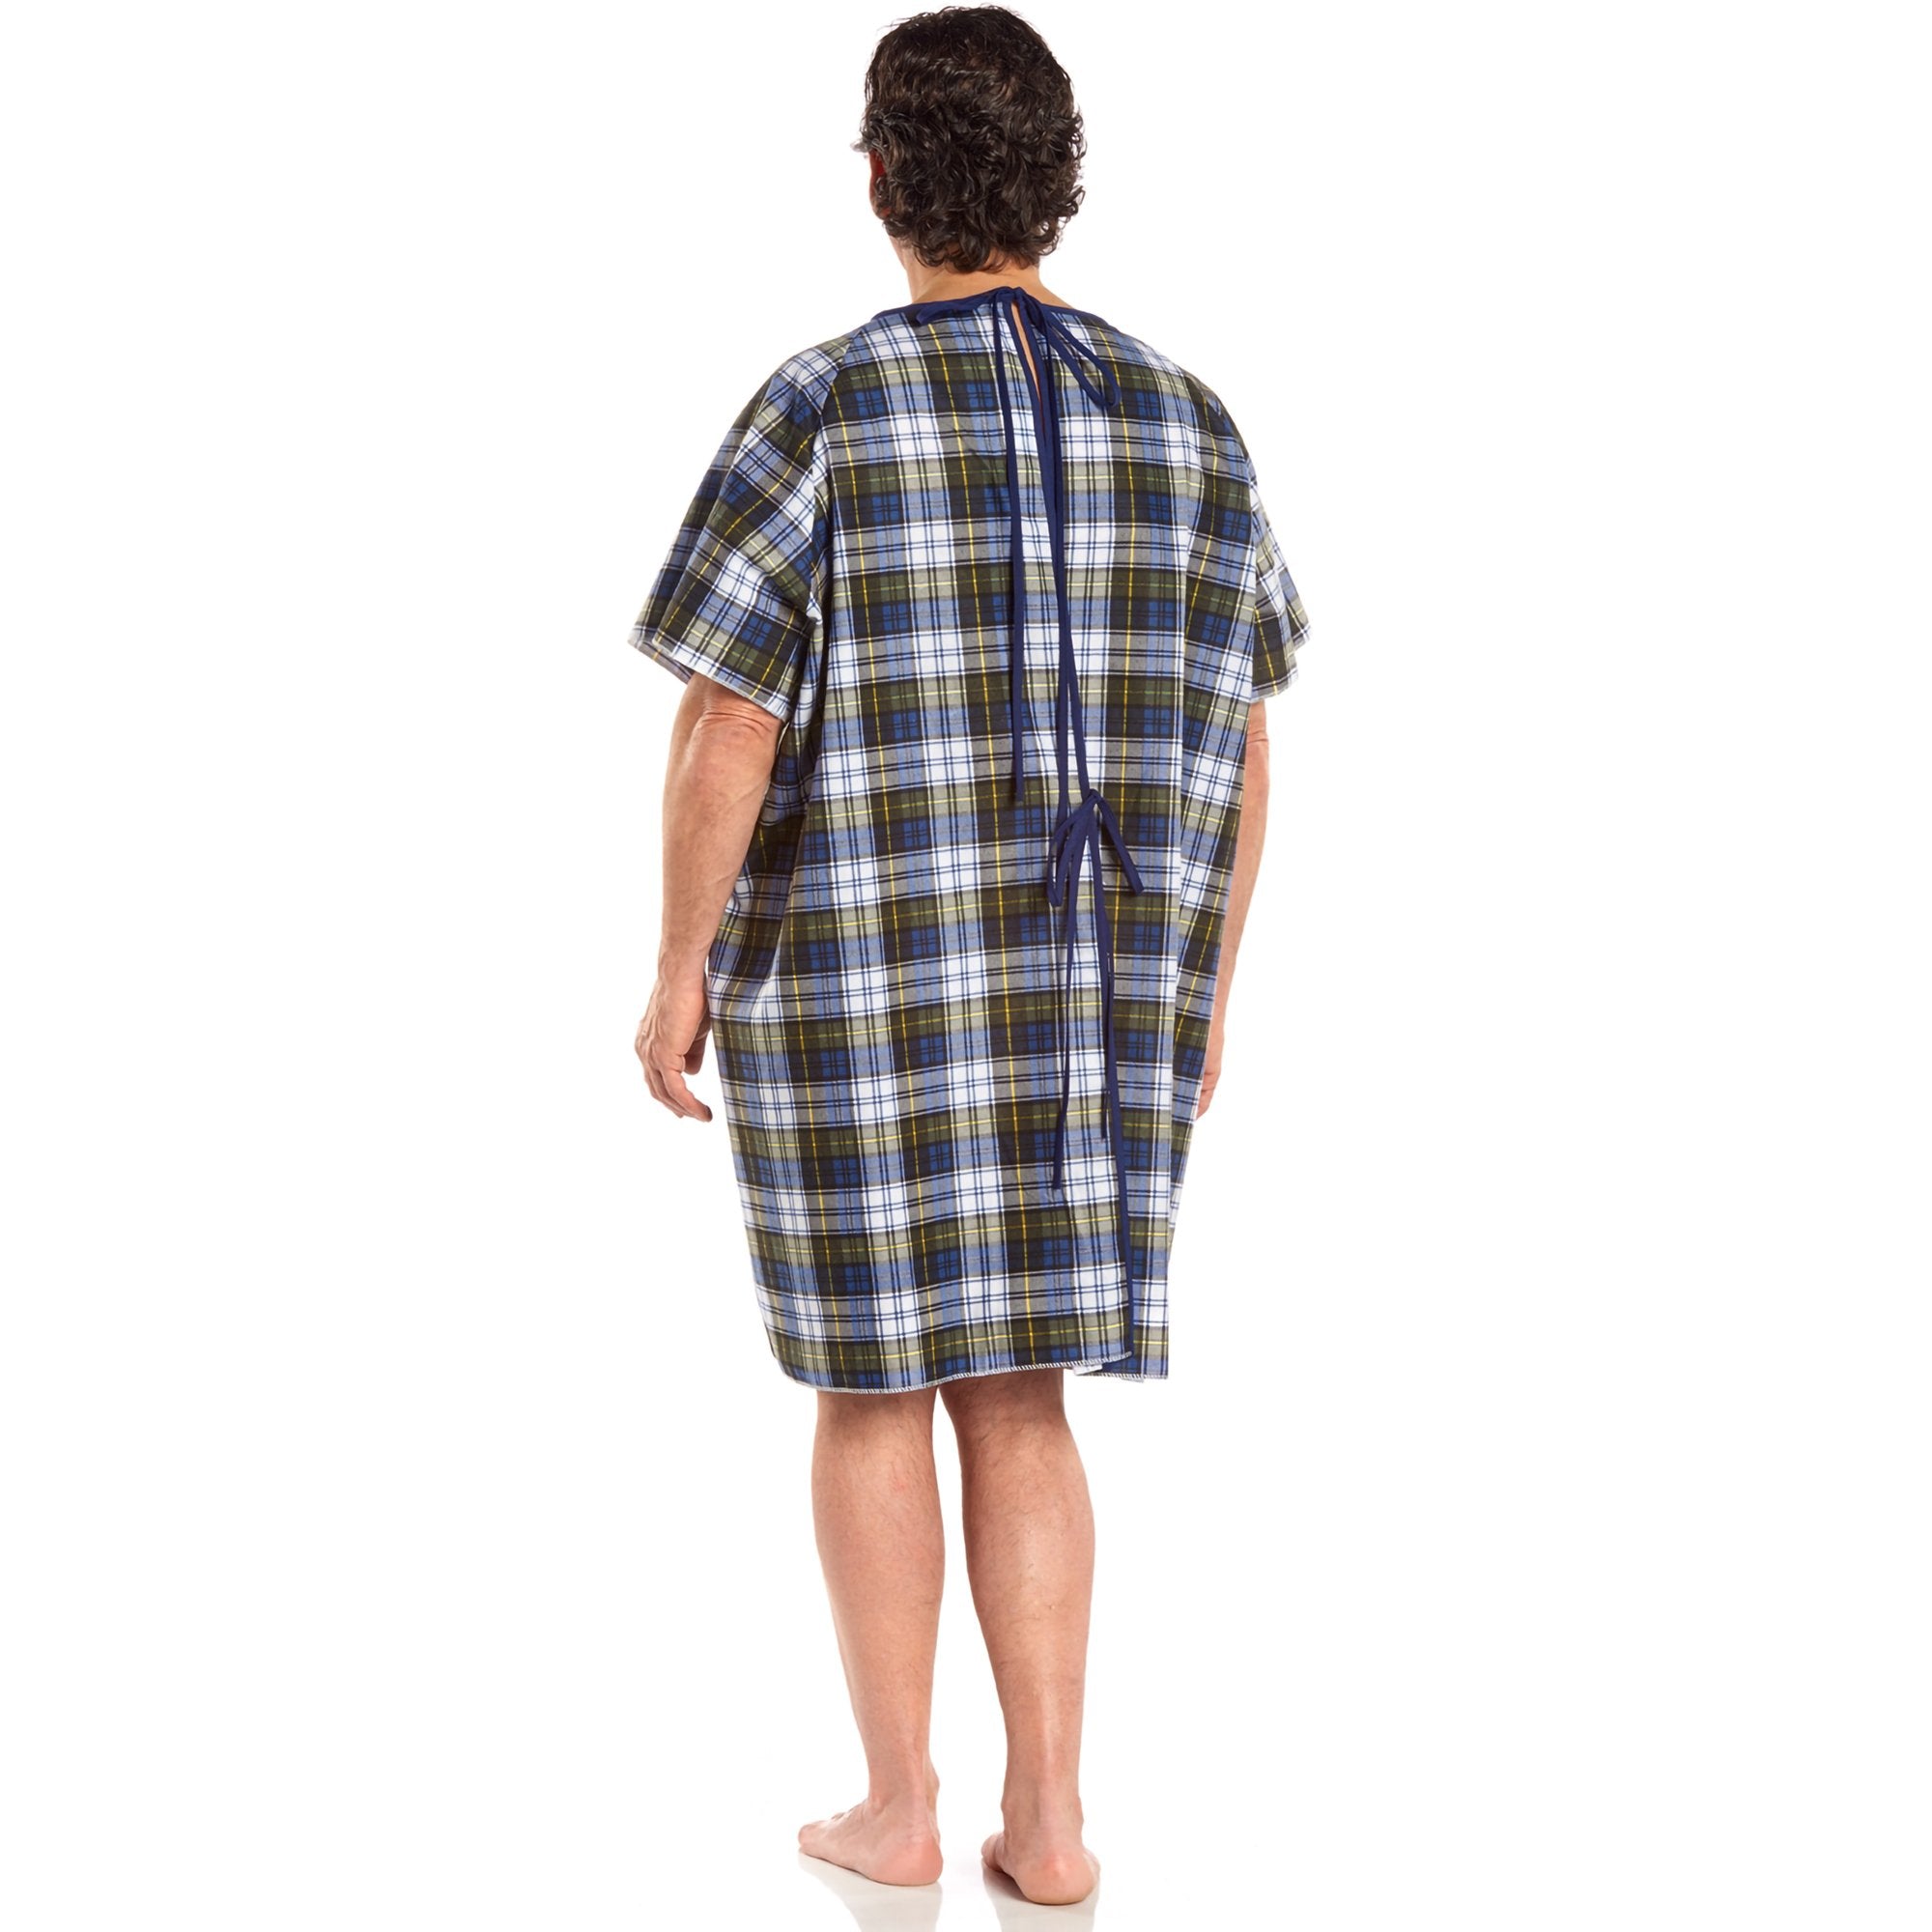 Patient Exam Gown TieBack™ One Size Fits Most Blue Reusable